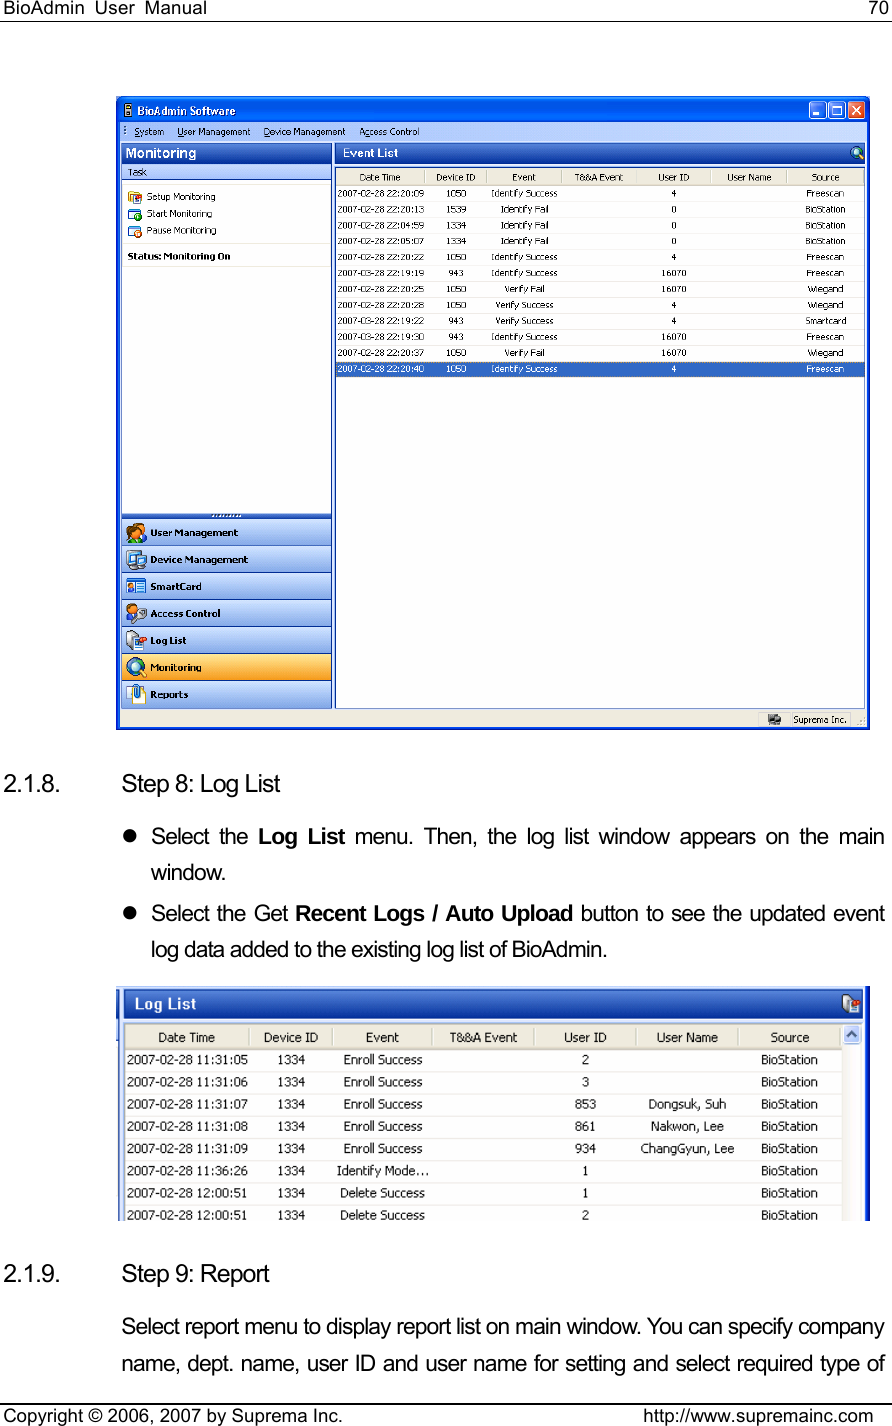 BioAdmin User Manual                                                                     70   Copyright © 2006, 2007 by Suprema Inc.                                http://www.supremainc.com  2.1.8.  Step 8: Log List z Select the Log List menu. Then, the log list window appears on the main window. z Select the Get Recent Logs / Auto Upload button to see the updated event log data added to the existing log list of BioAdmin.  2.1.9. Step 9: Report Select report menu to display report list on main window. You can specify company name, dept. name, user ID and user name for setting and select required type of 